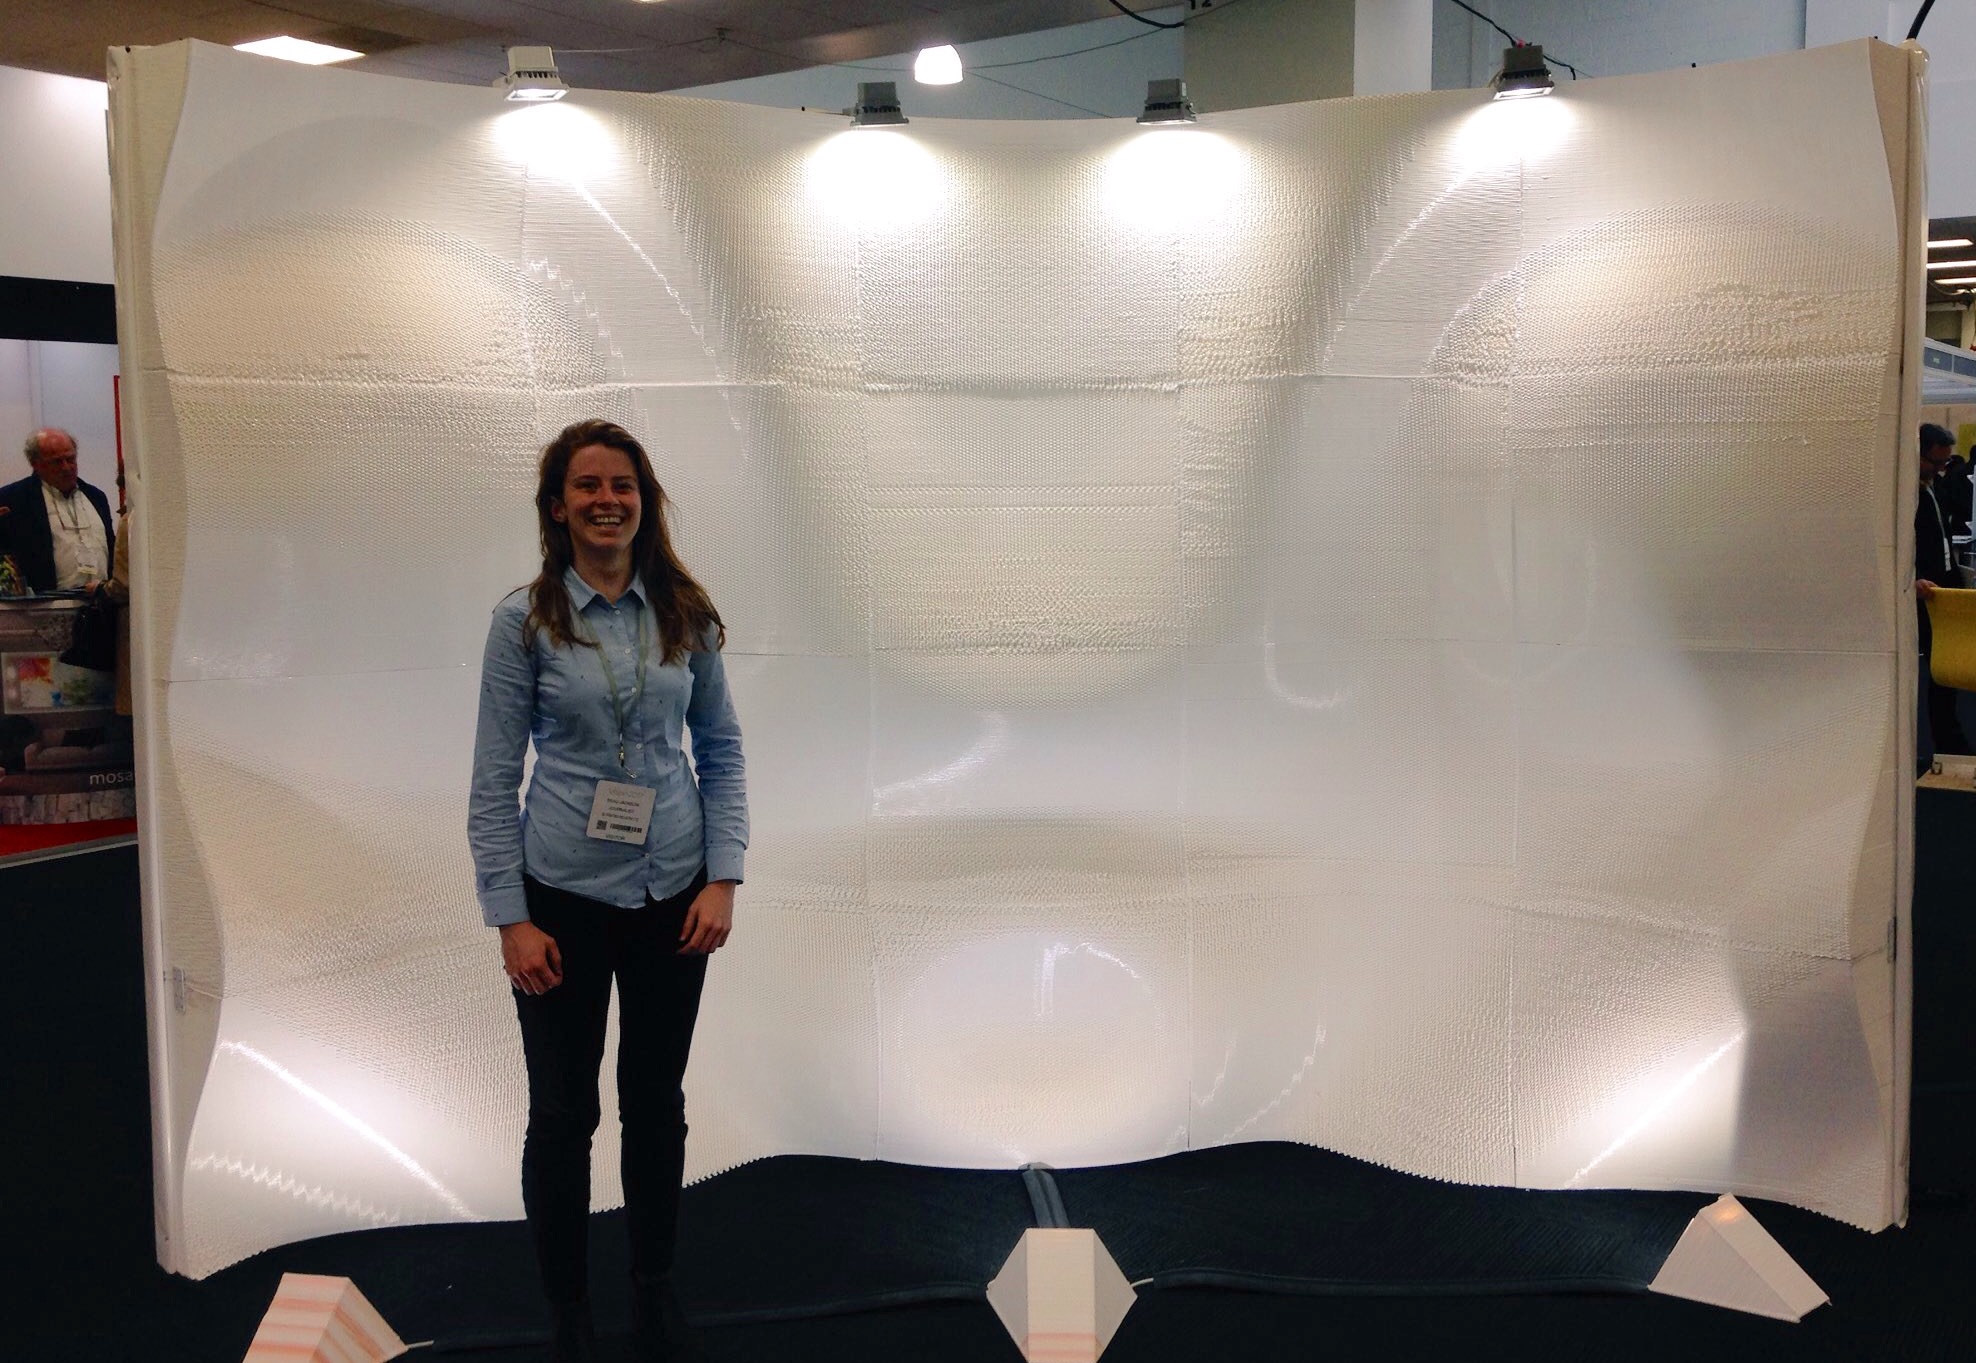 3D Printing Industry journalist Beau Jackson stands with WASProject's 3D printed wall at Vision 2017 in London, UK. Photo by Nicola Schiavarelli